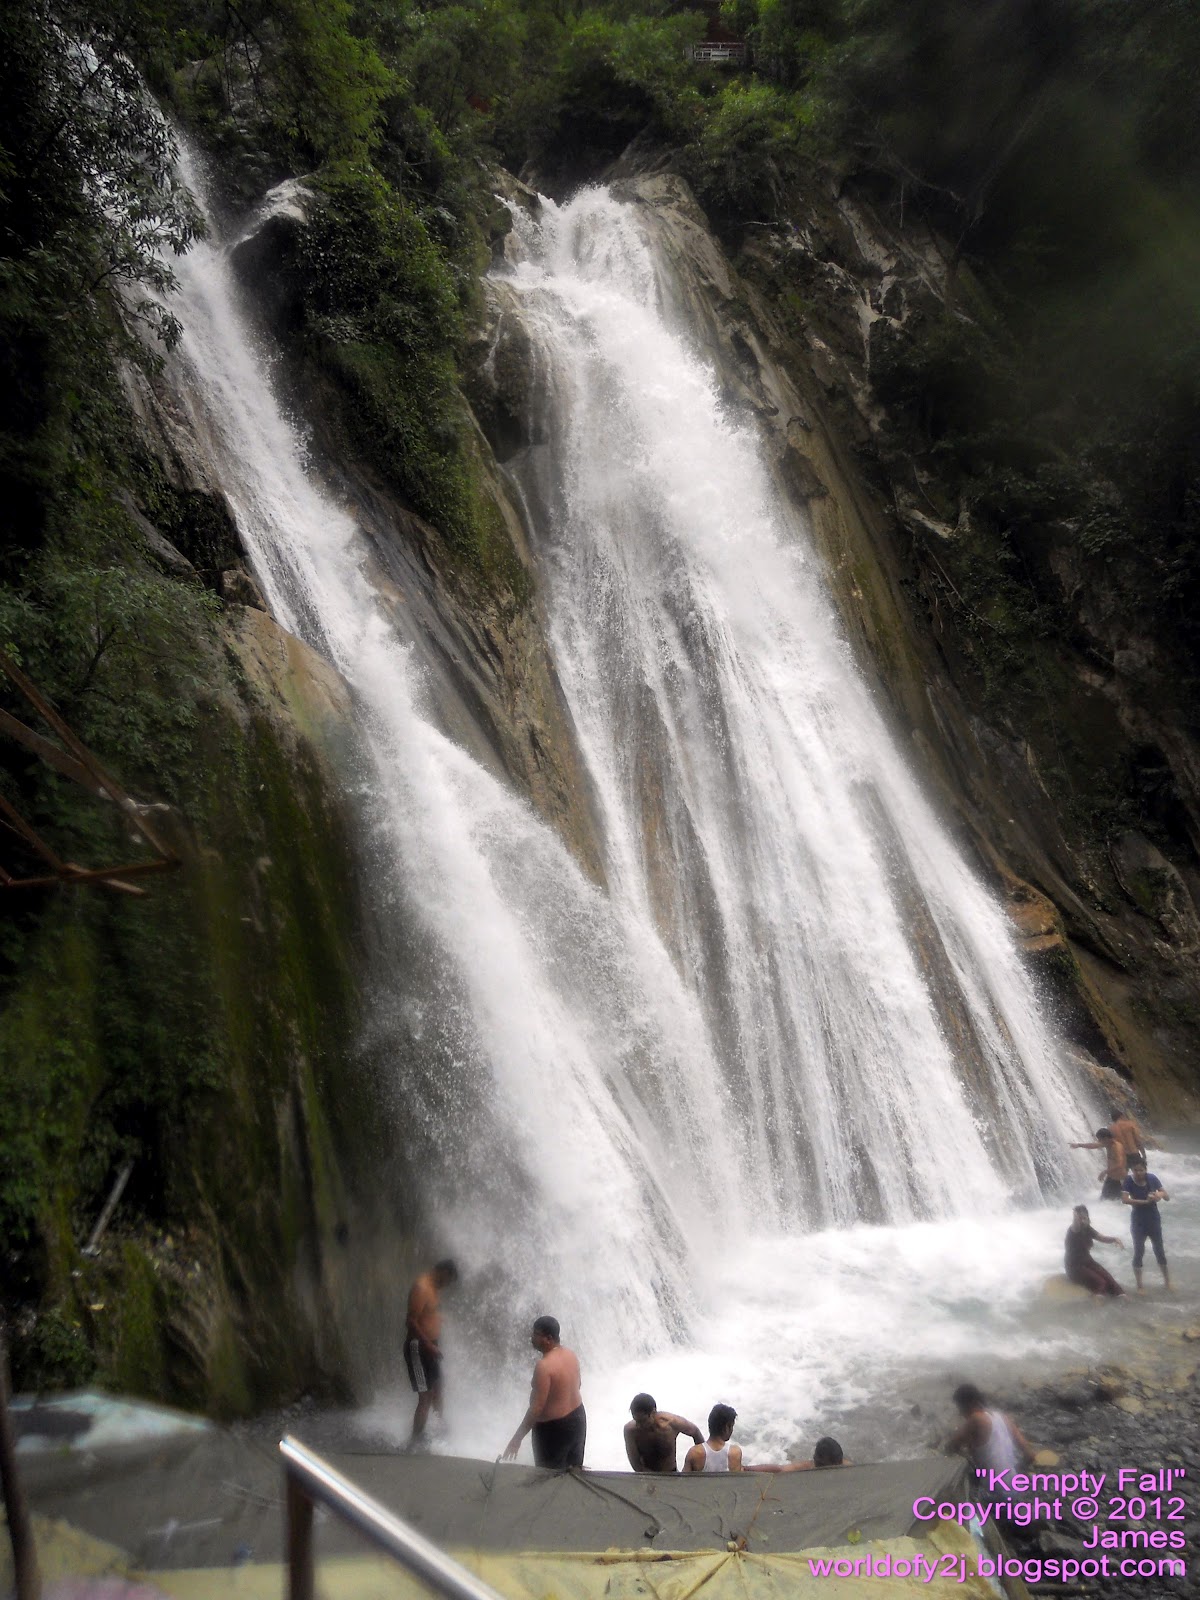 The Photography Blog: Kempty Fall, Mussoorie